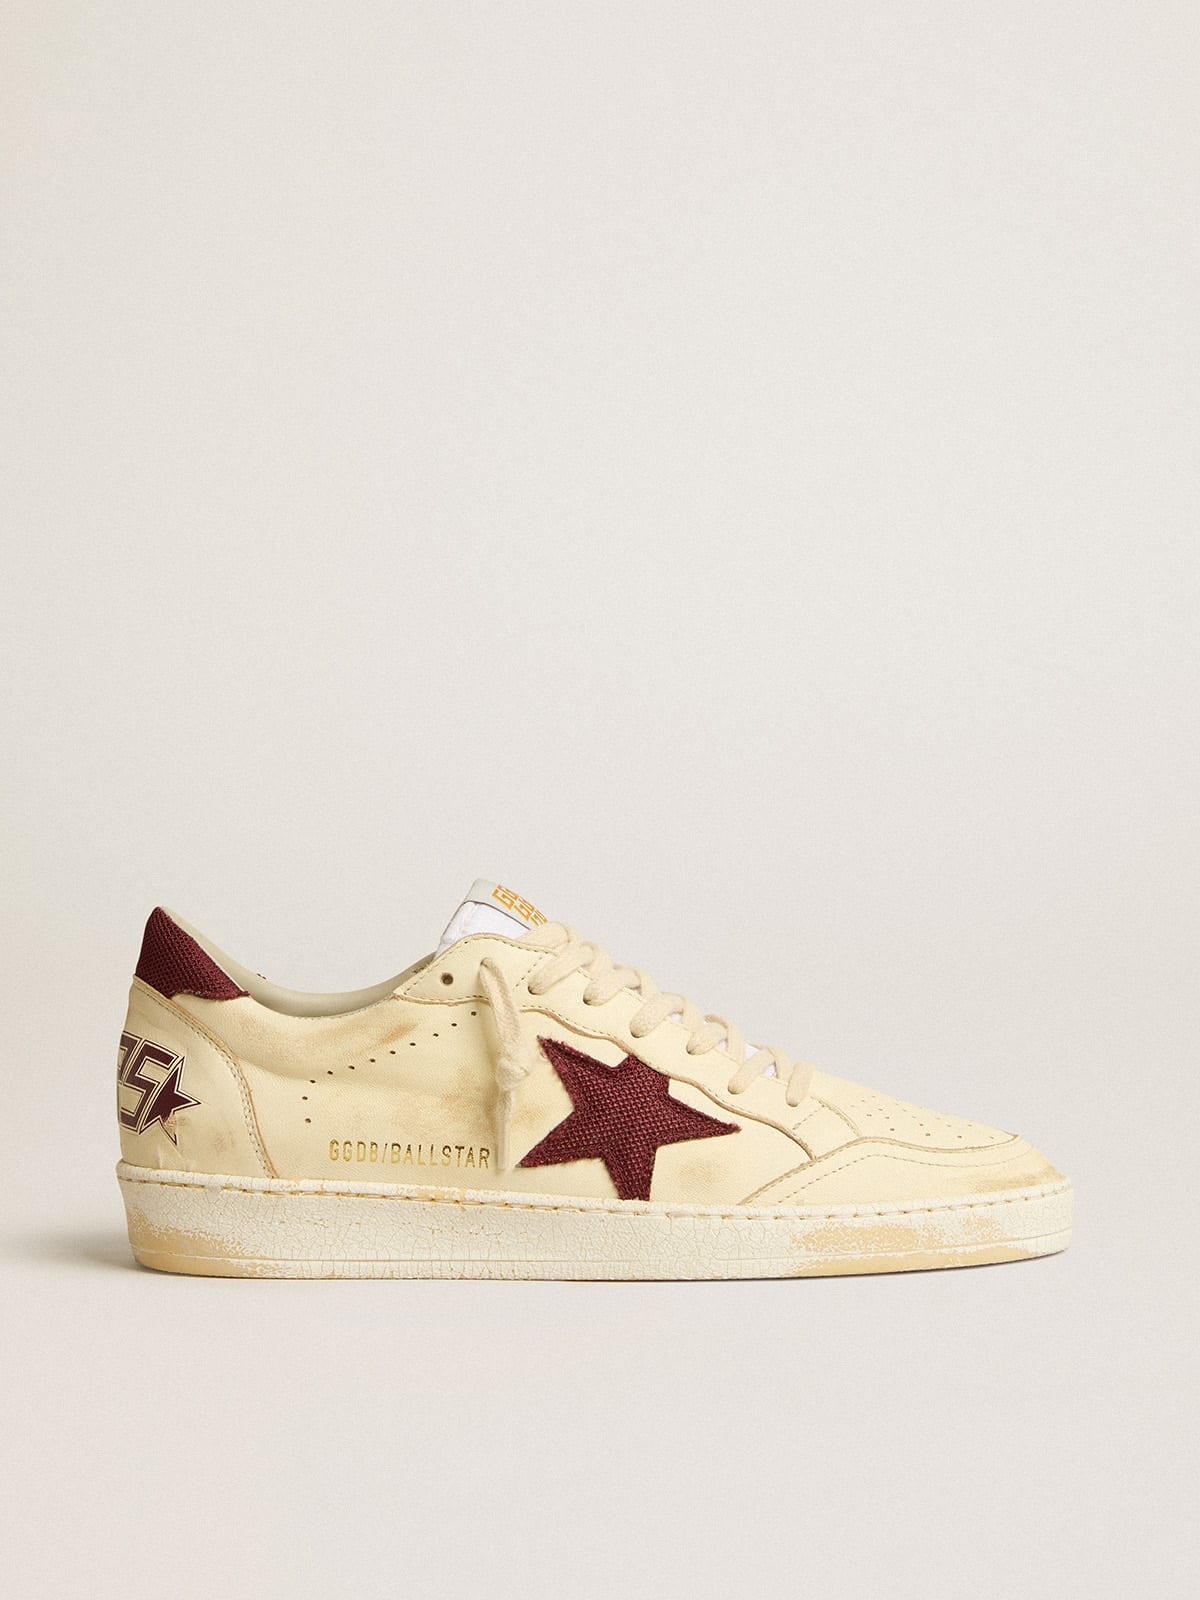 Ball Star in beige nappa with burgundy mesh star and heel tab - 1